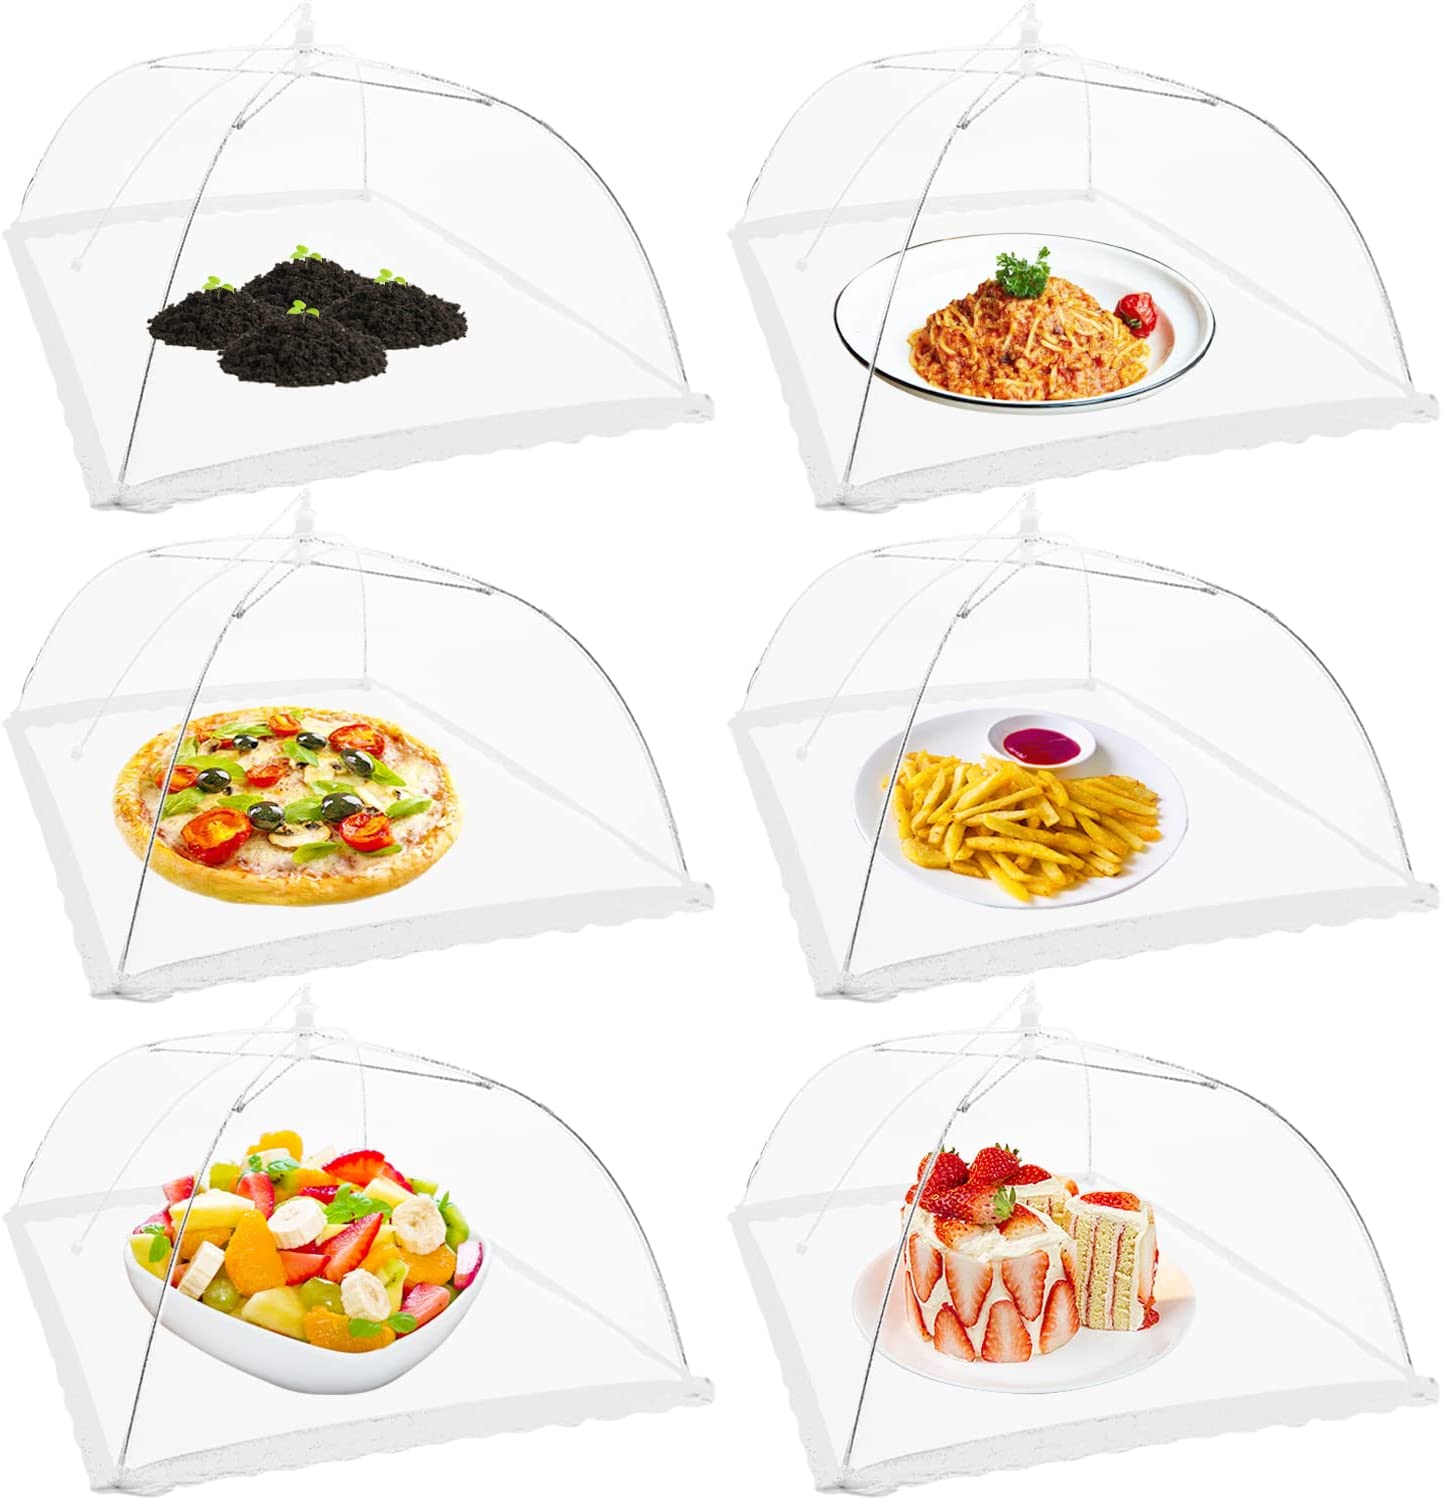 6 Pack - 17 x 17 Inch - Food Covers Tents,Pop-Up Fine Net Screen Umbrella,Reusable and Collapsible Mesh Cover for Outdoors, Parties, Picnics, BBQ